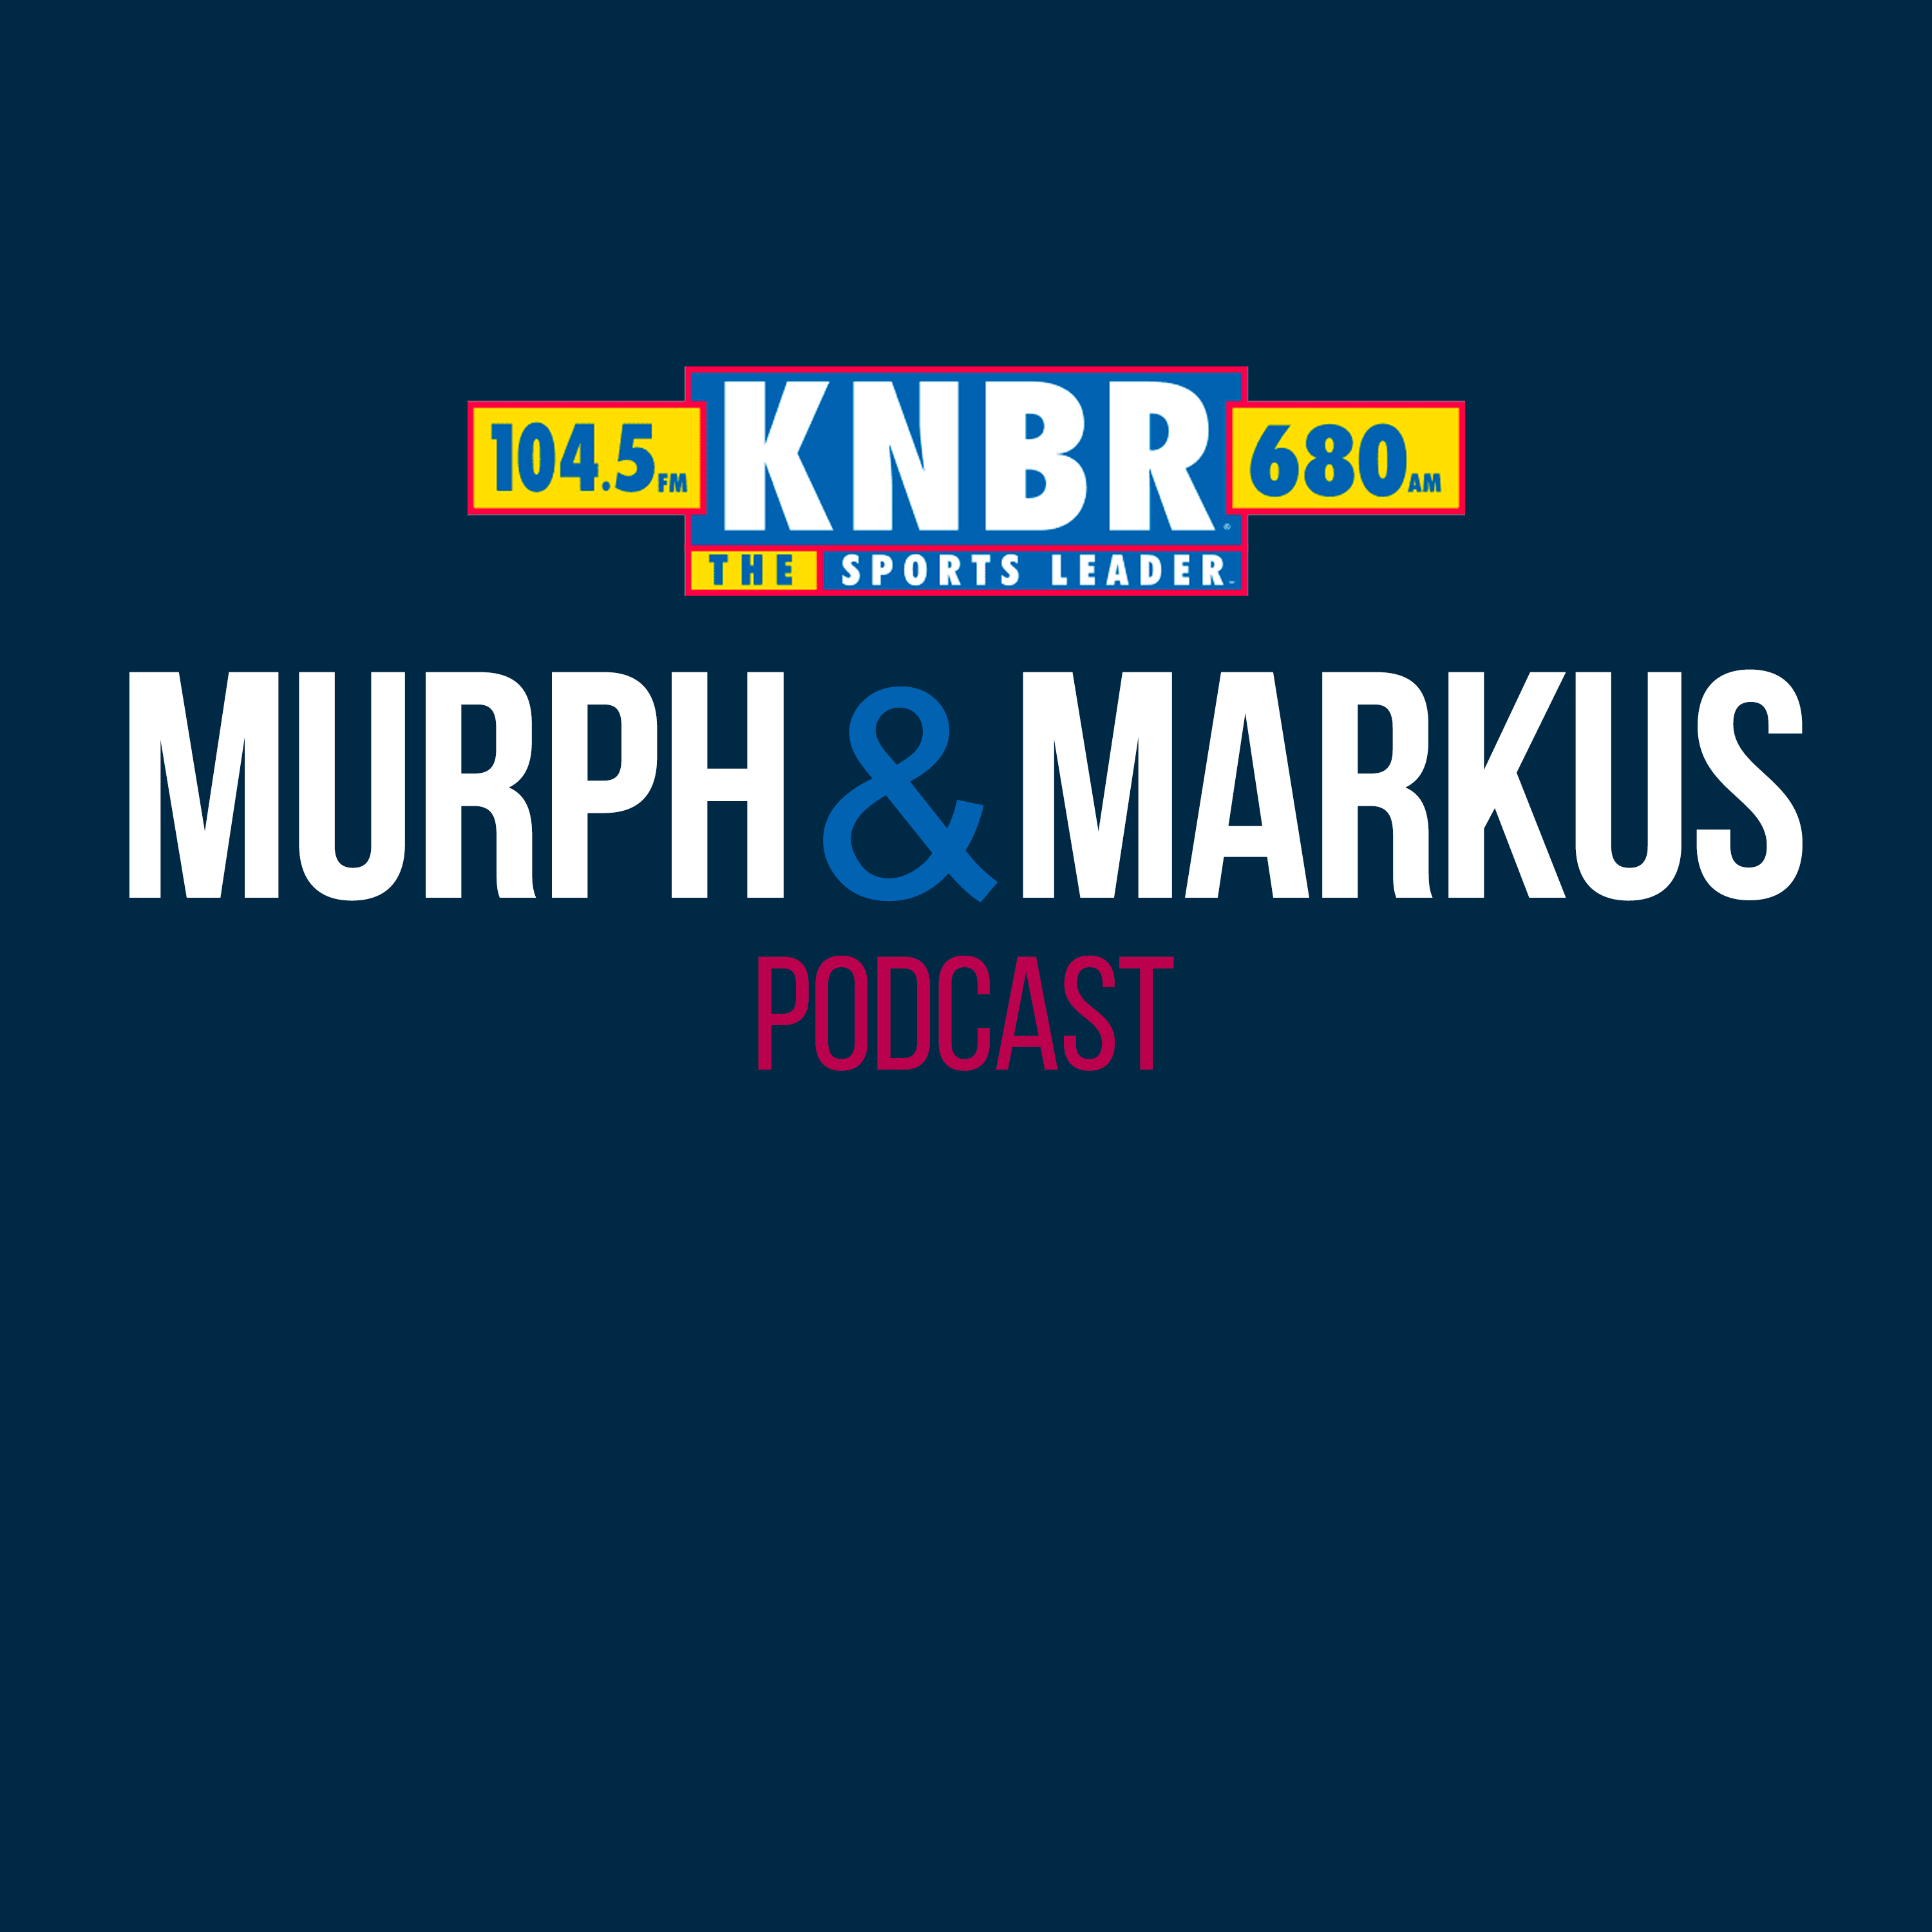 6-20 Hour 3: Murph & Markus reminisce about Willie Mays & some of their favorite memories, talk to Laura Britt, and dive into the Cooler of Content